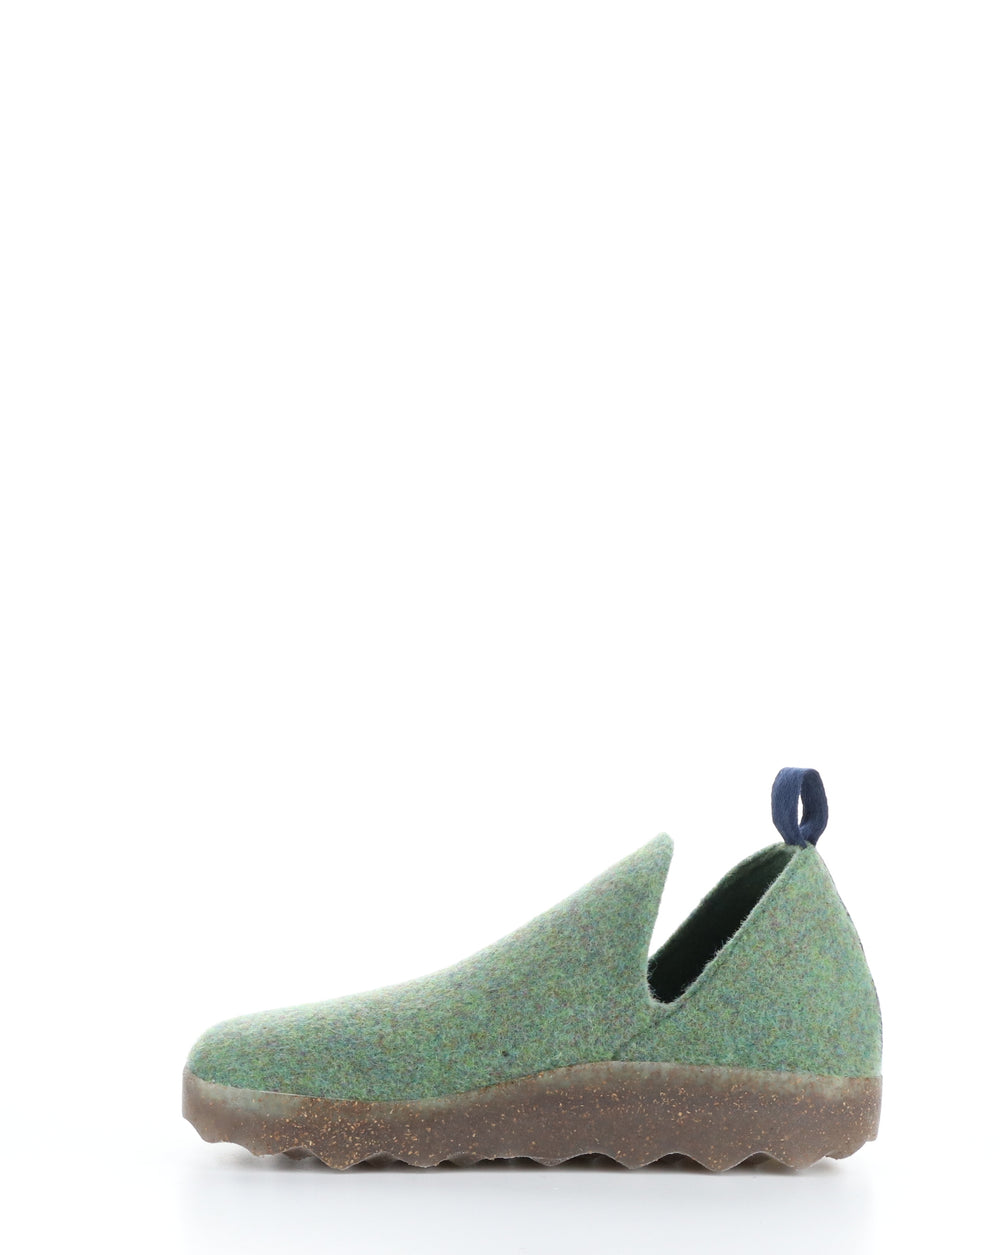 CITY Green Round Toe Shoes